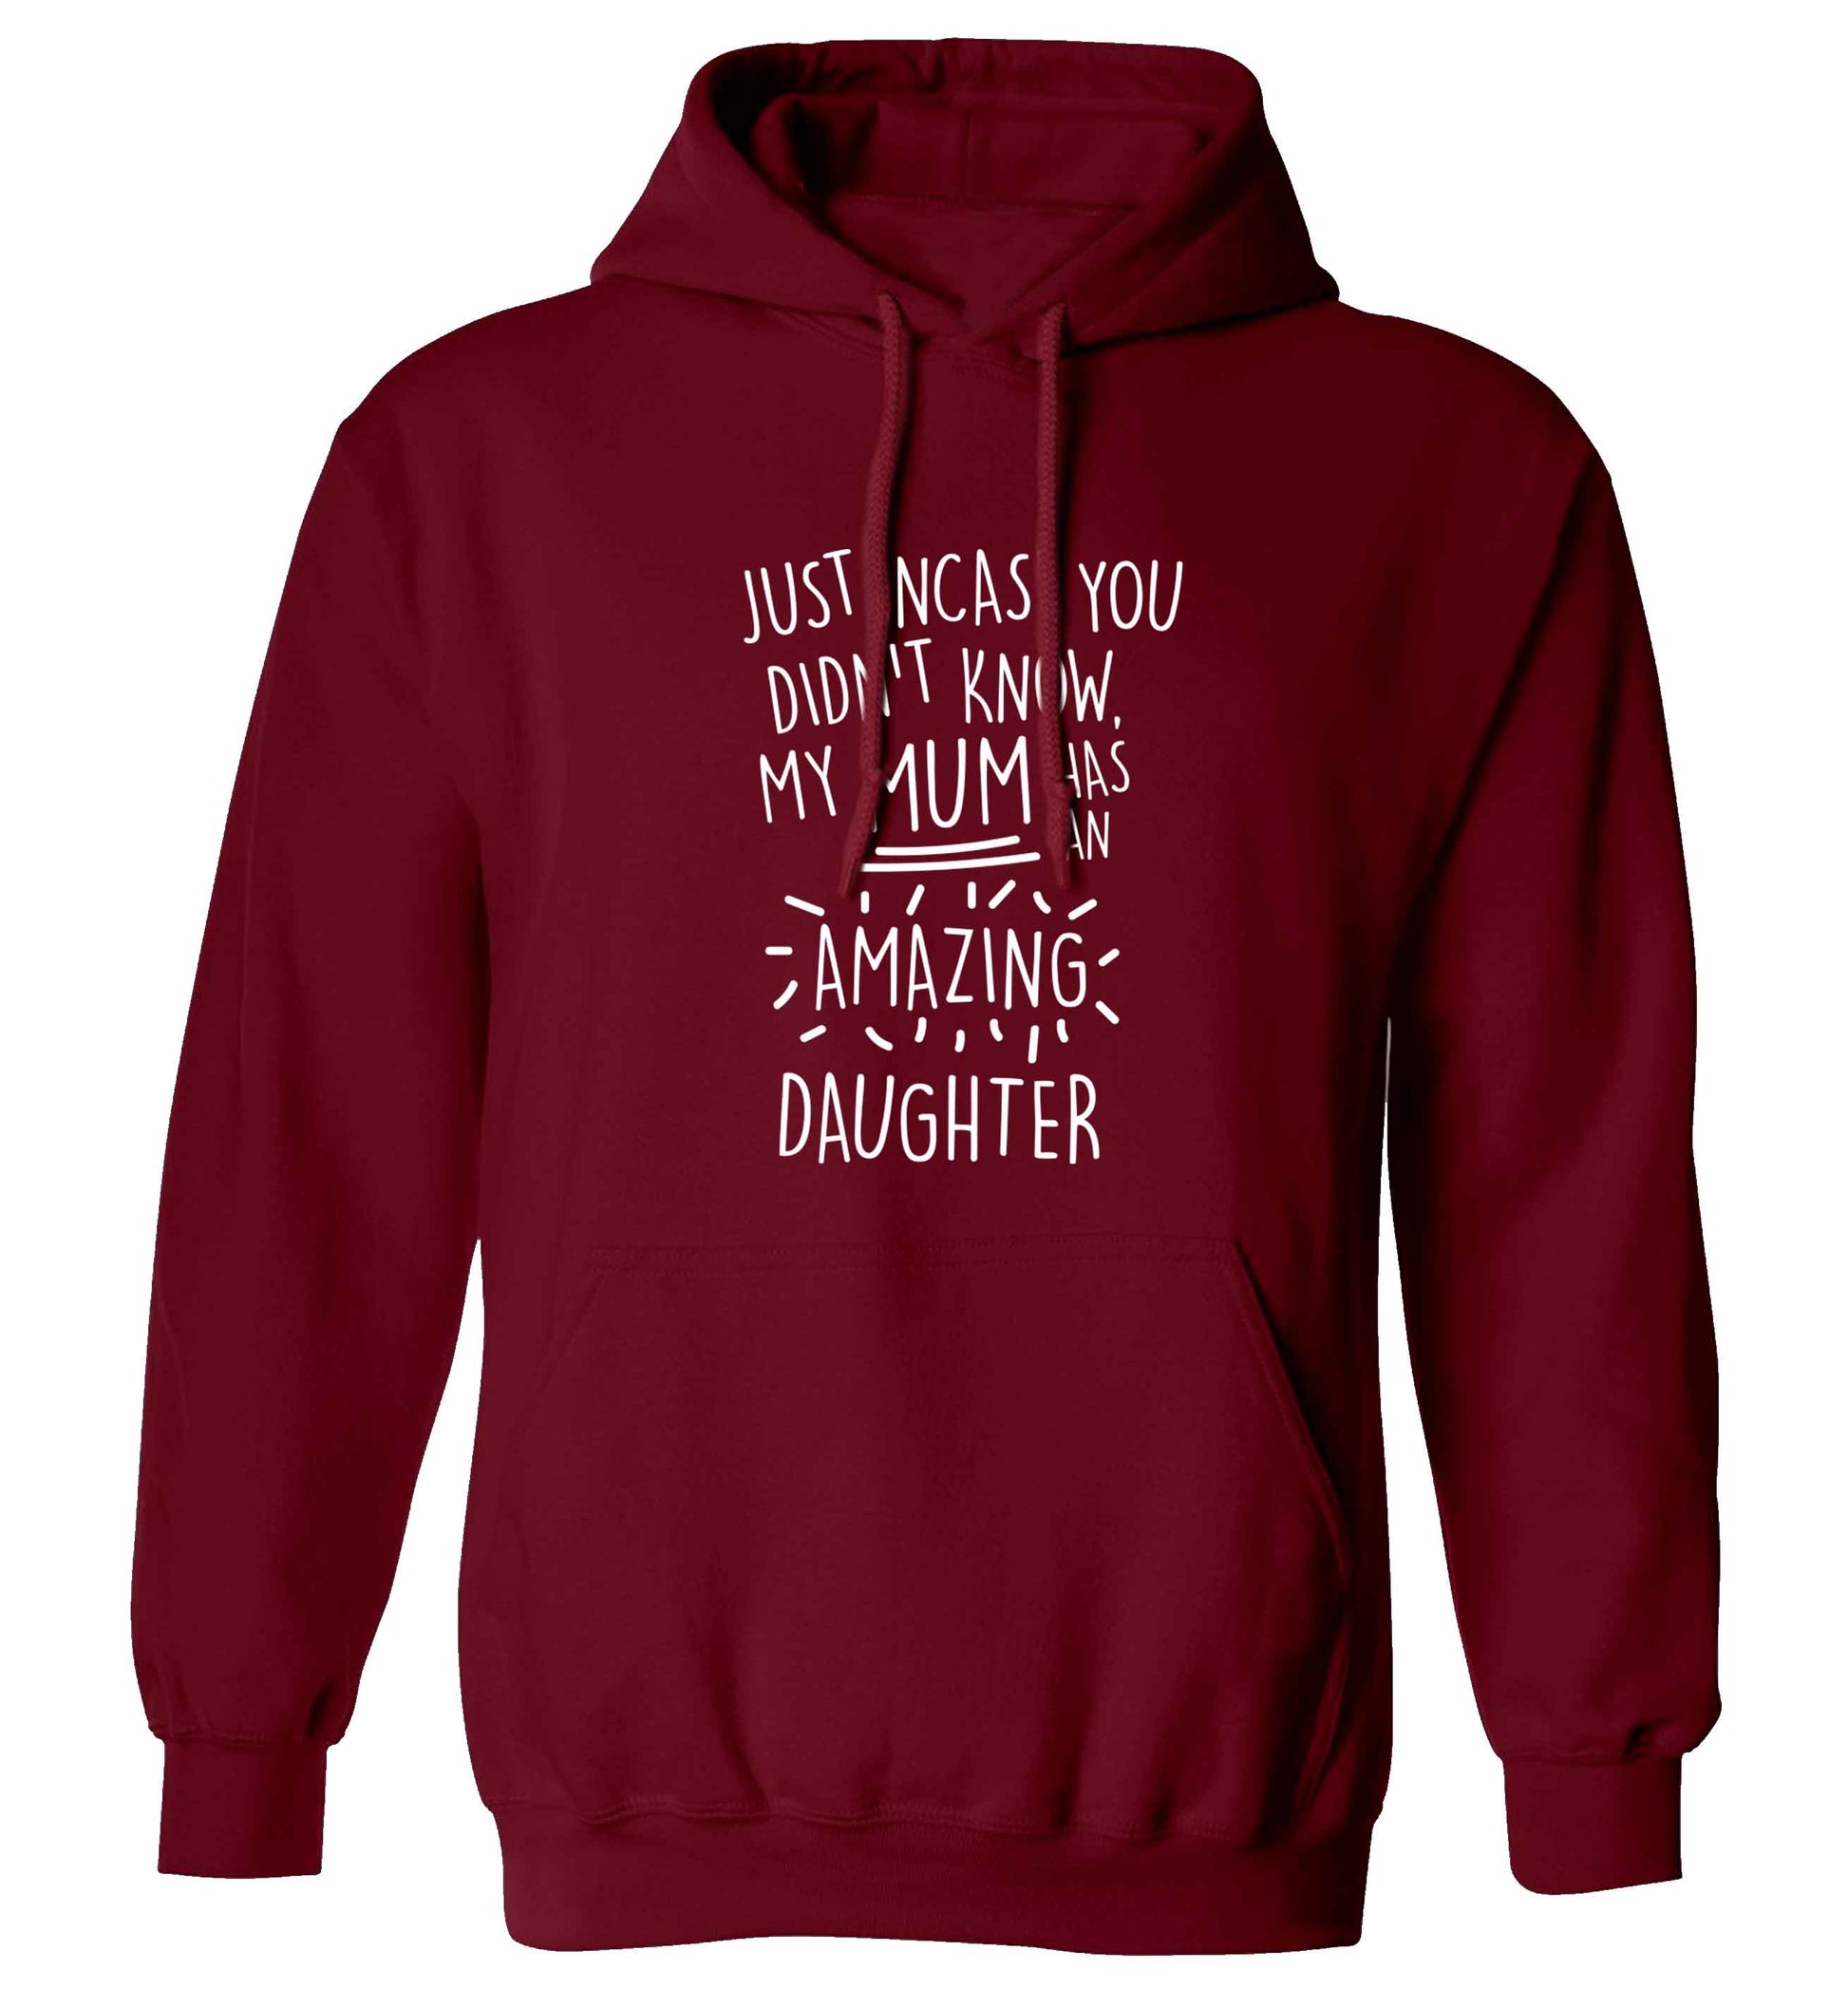 Just incase you didn't know my mum has an amazing daughter adults unisex maroon hoodie 2XL